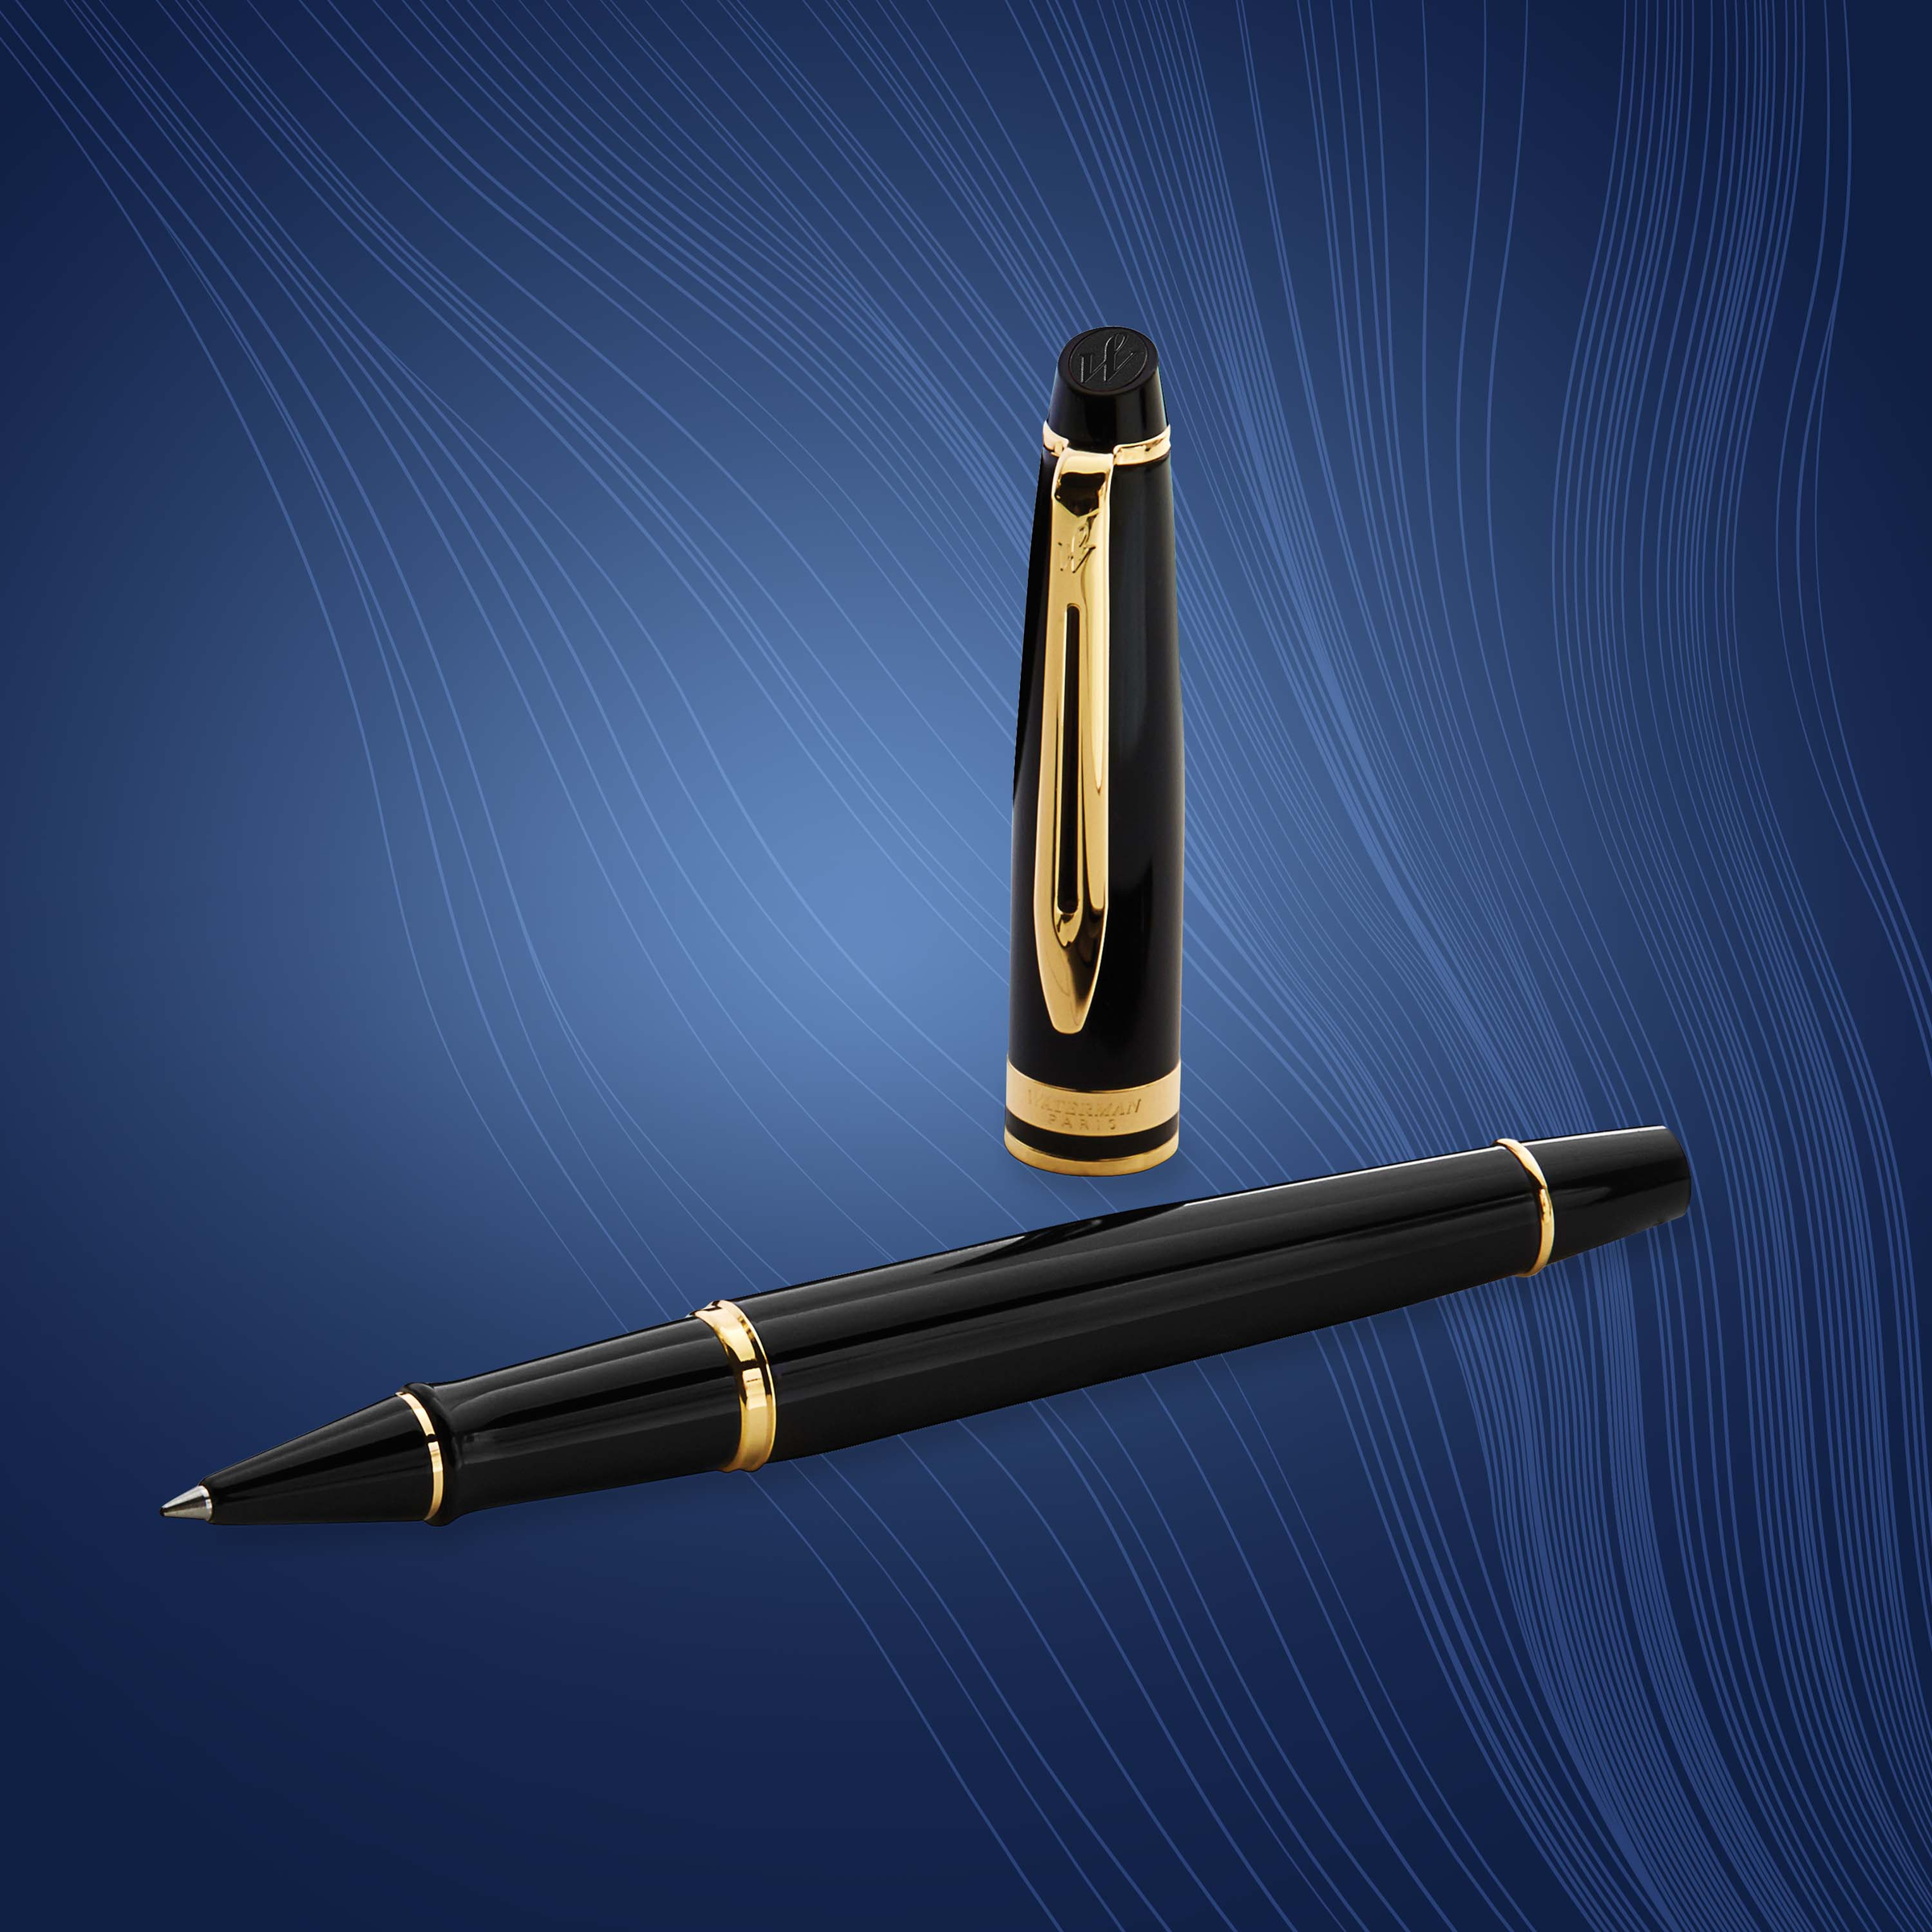 Waterman Expert Black Lacquer Gold Trim Rollerball - Pencraft the boutique